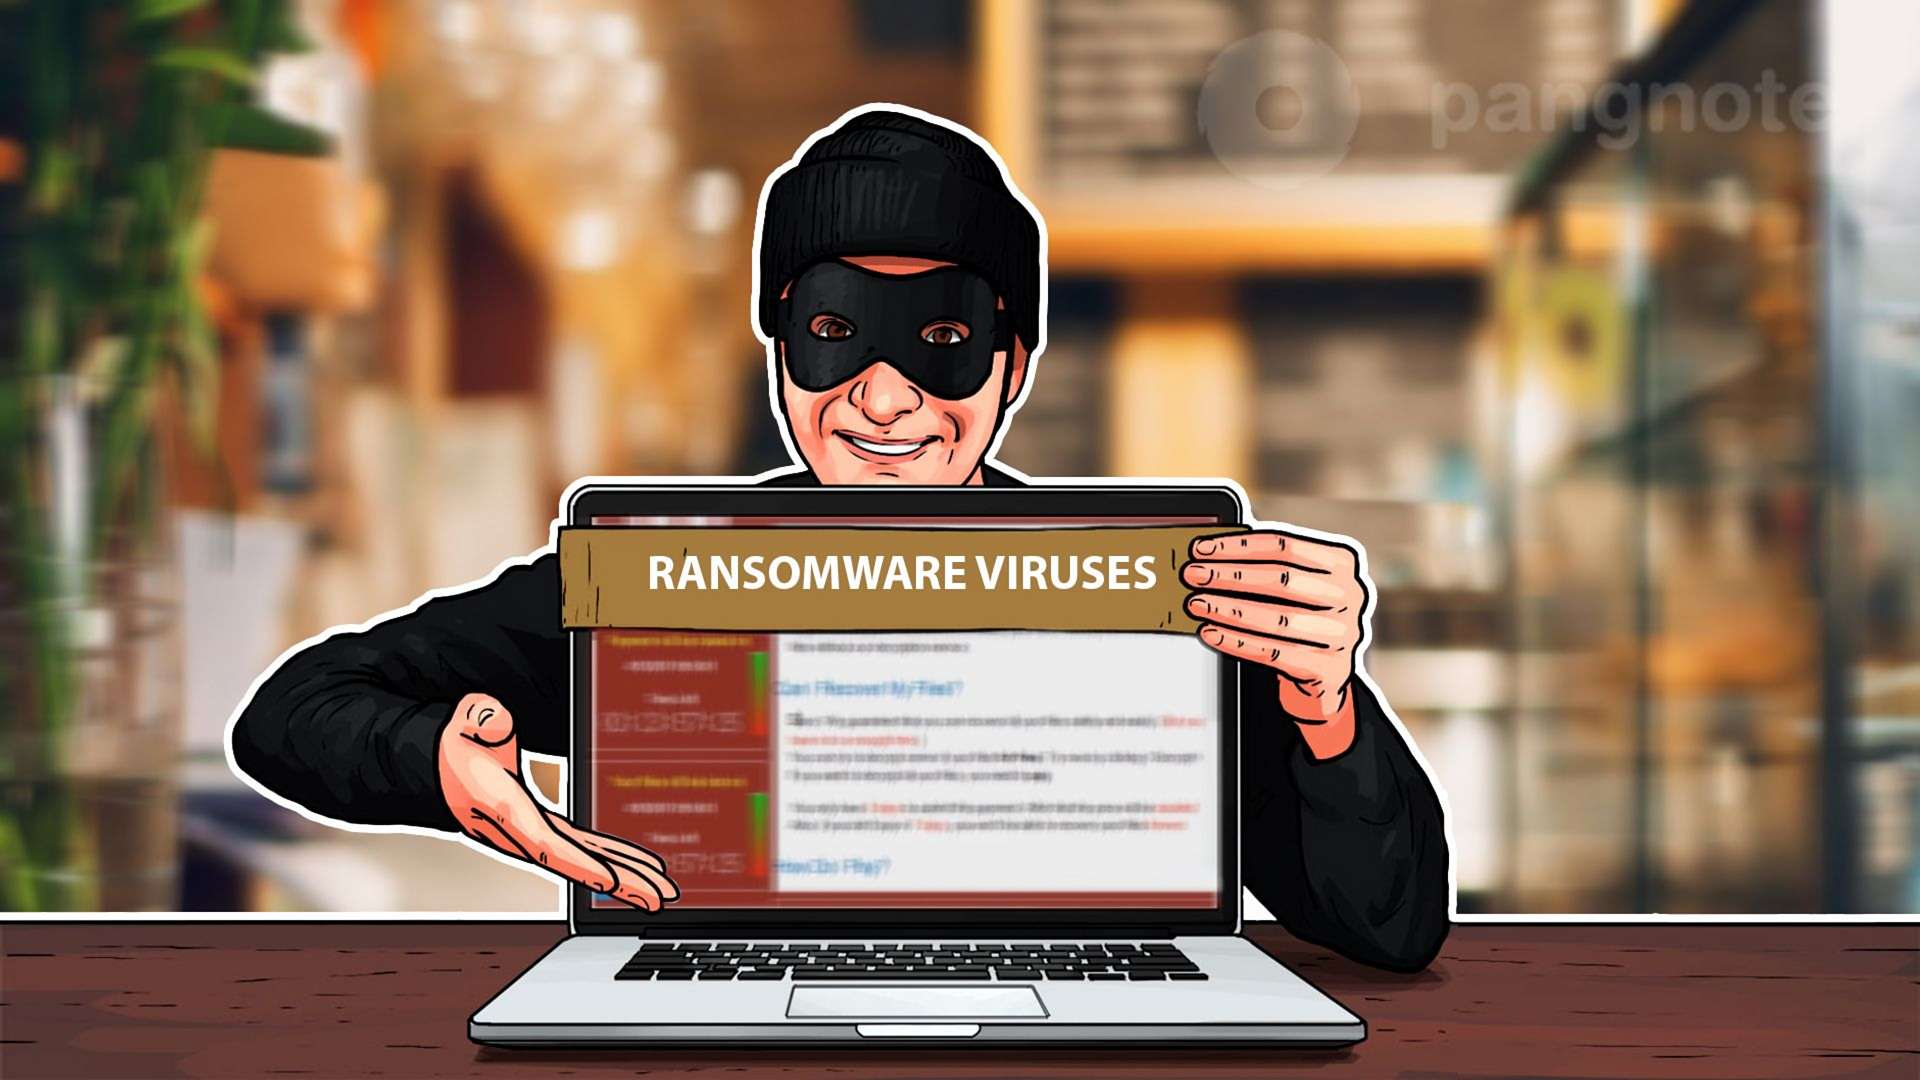 Backup as a guarantee of protection against ransomware viruses